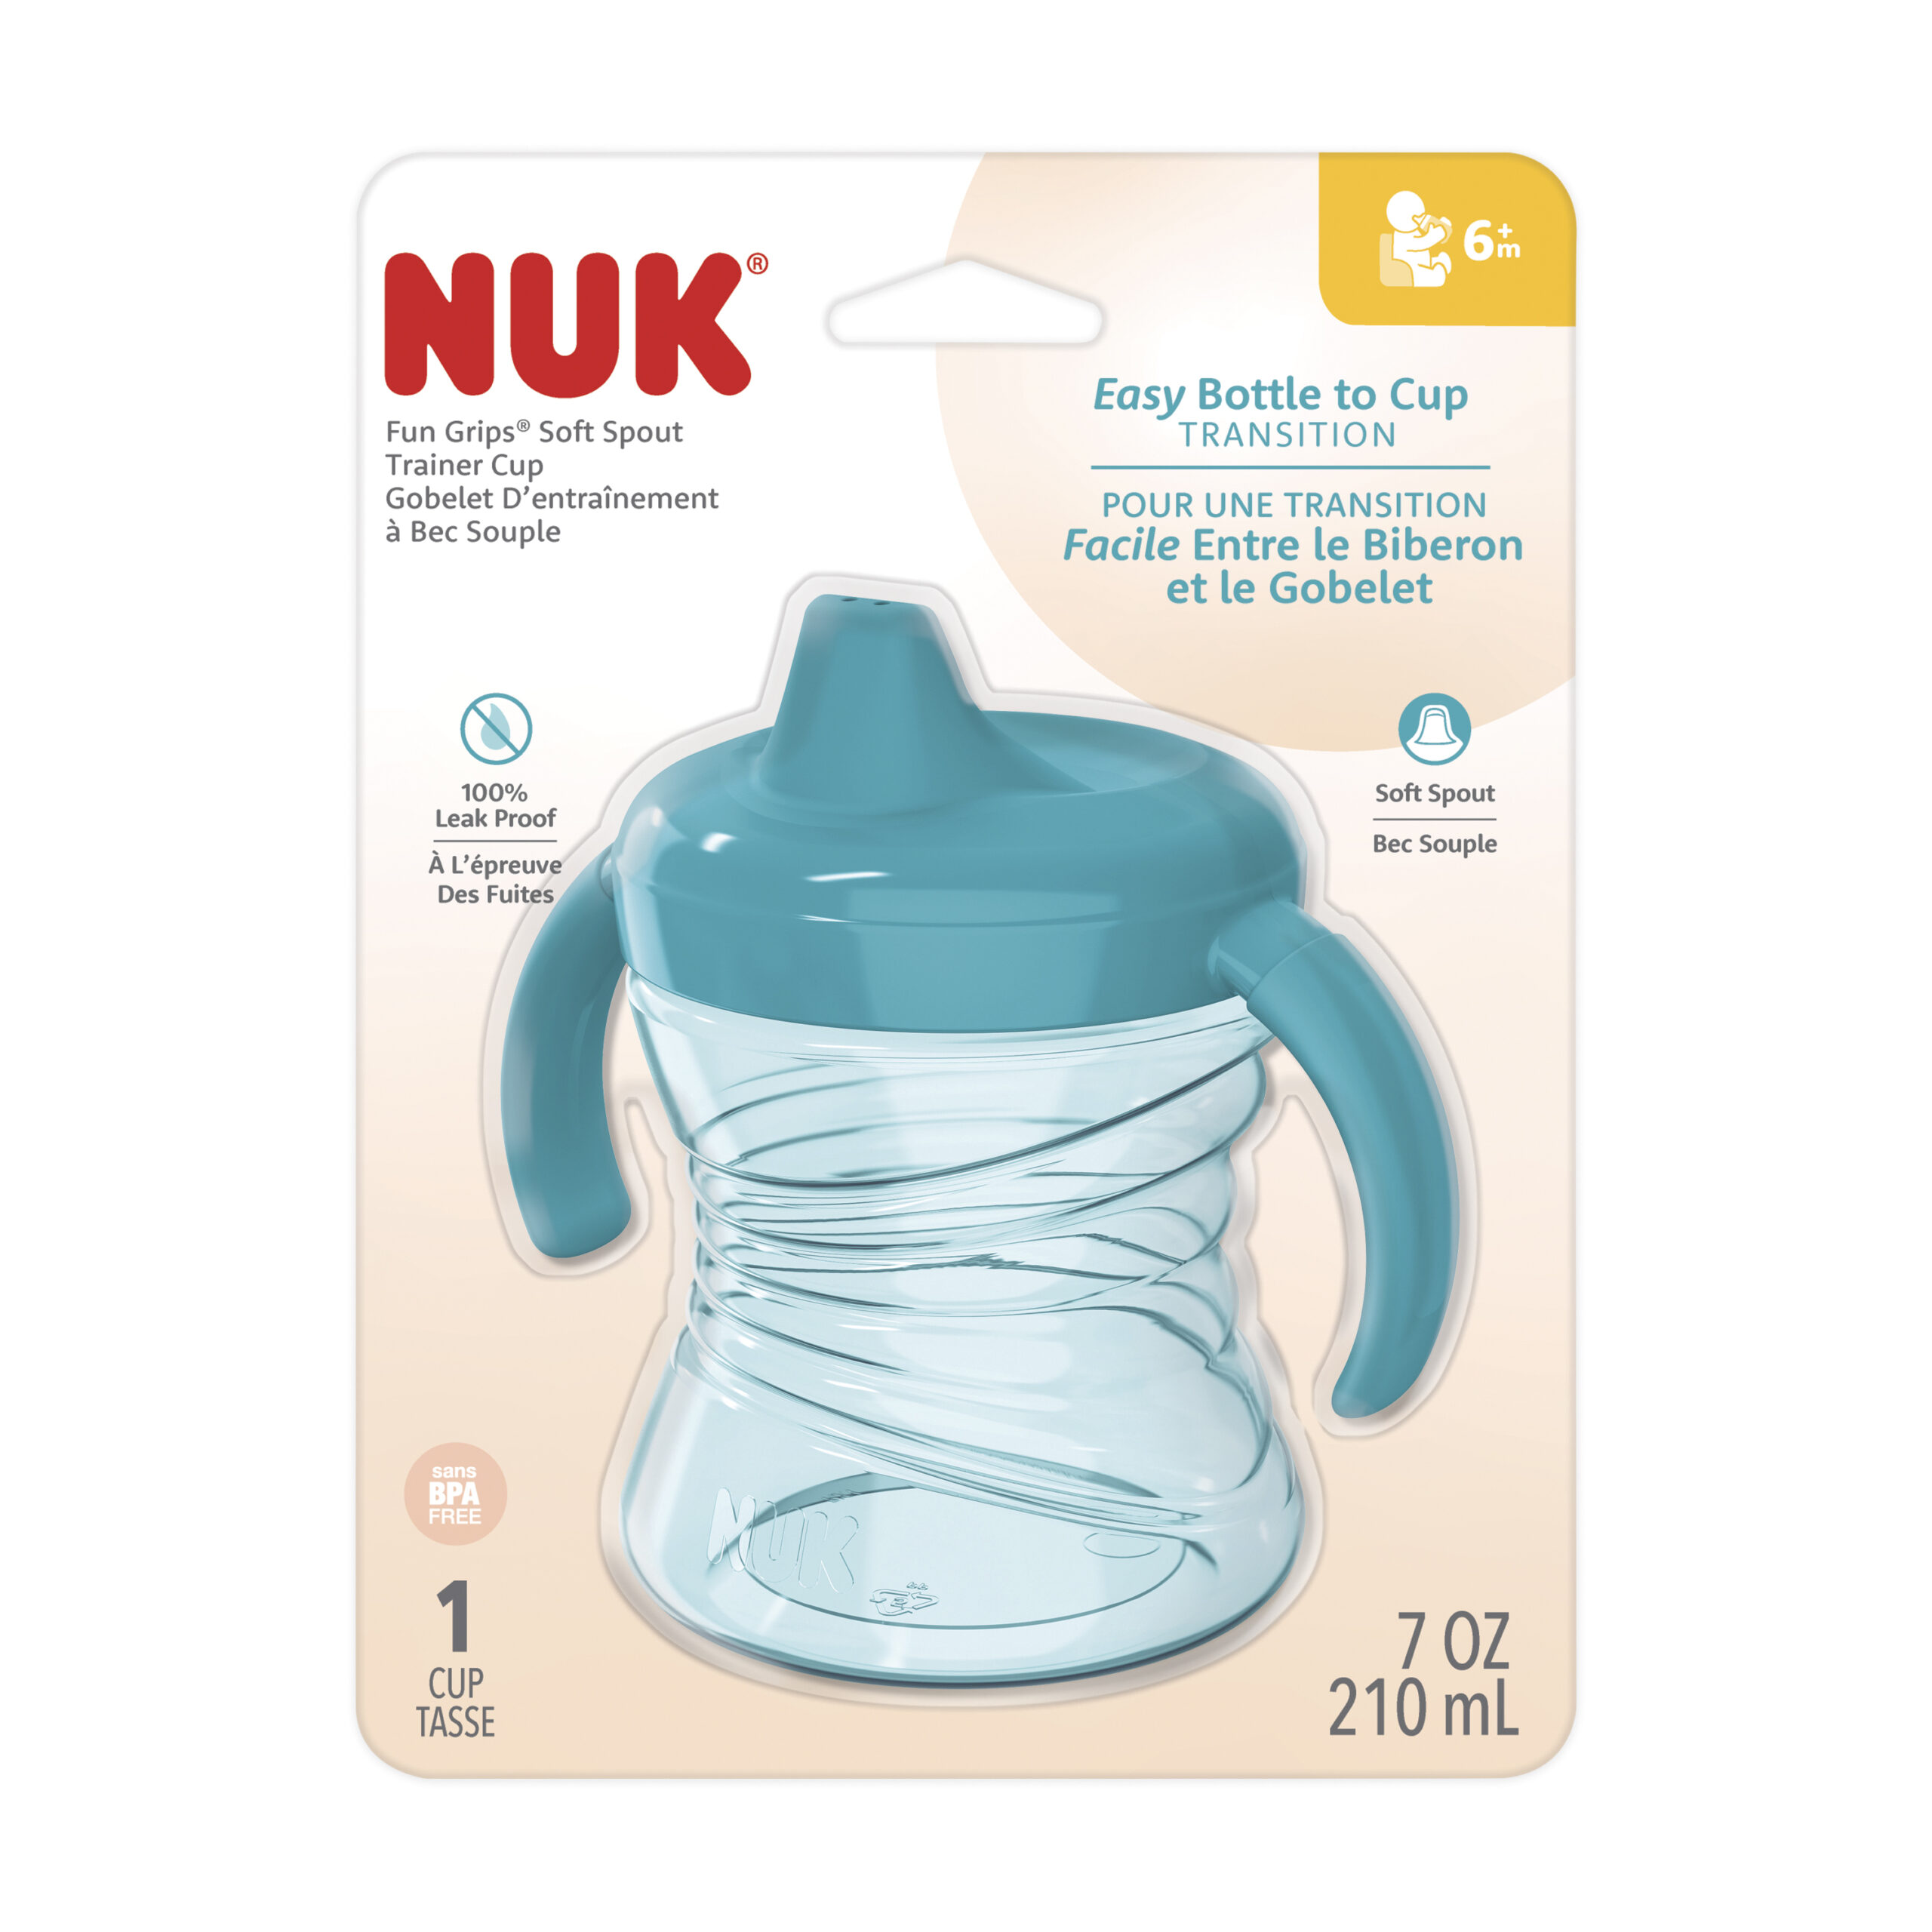 NUK® FUN GRIPS® Soft Spout Trainer Cup 7OZ Product Image 3 of 7